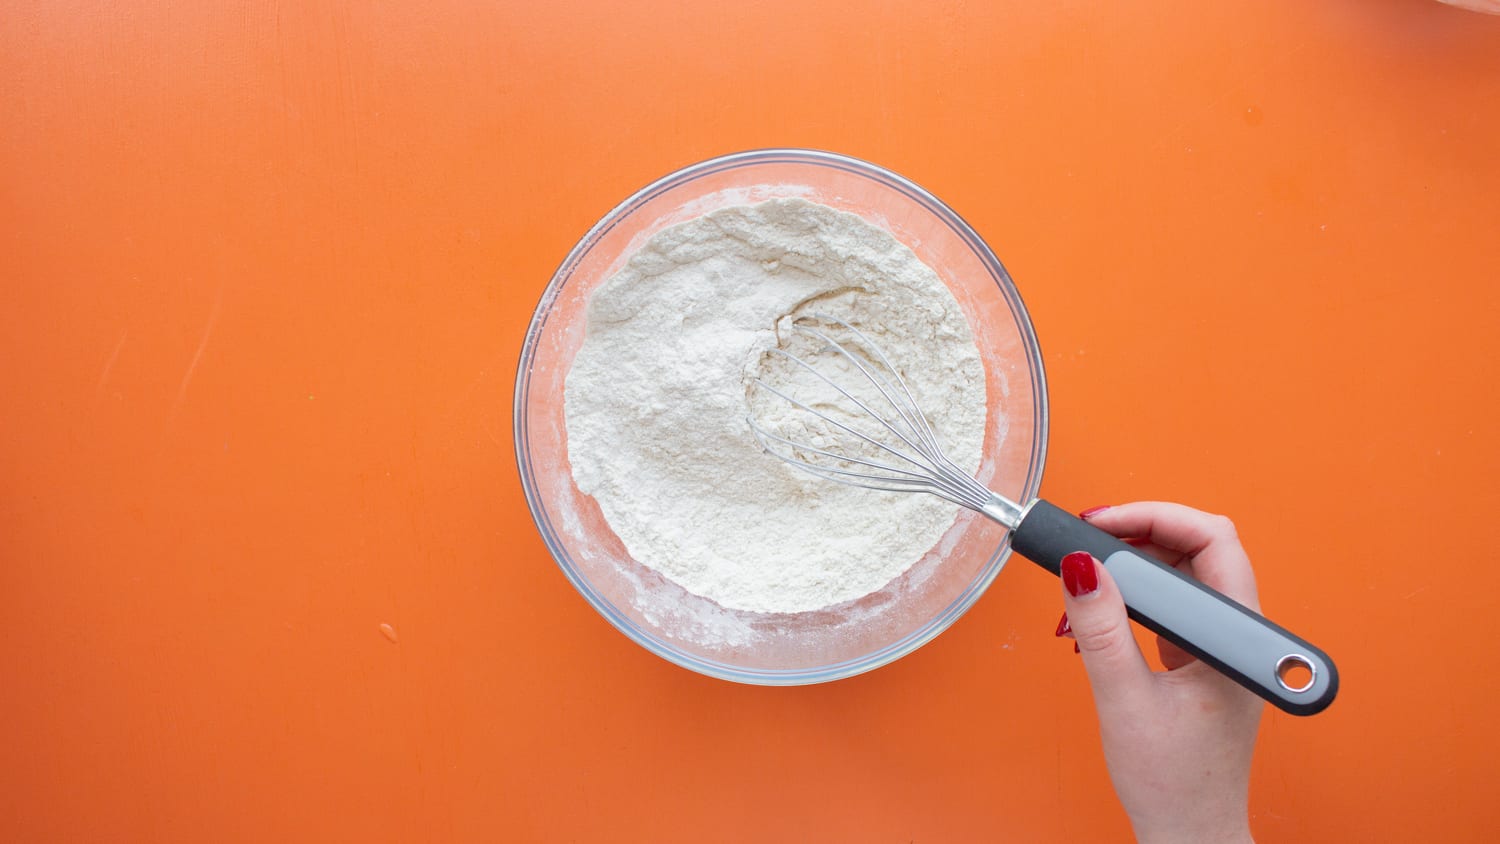 Flour and baking powder in a glass bowl and mixed with a metal whisk on an orange background.